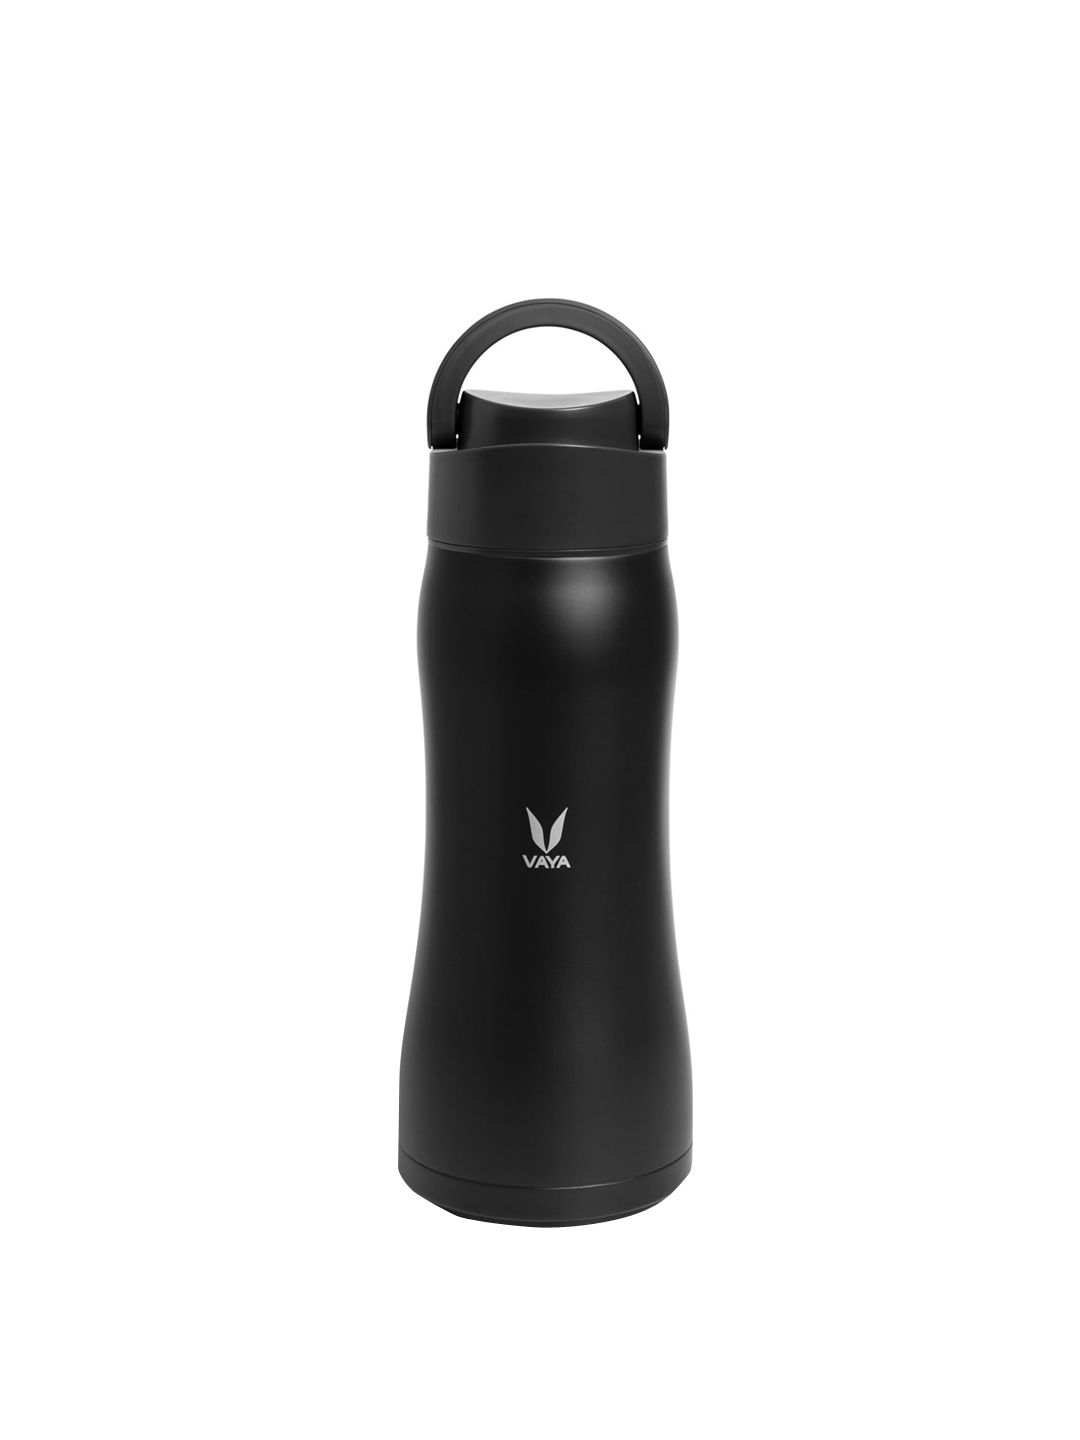 Vaya Black Solid Double Wall Insulated Stainless Steel Flask 900 Ml Price in India